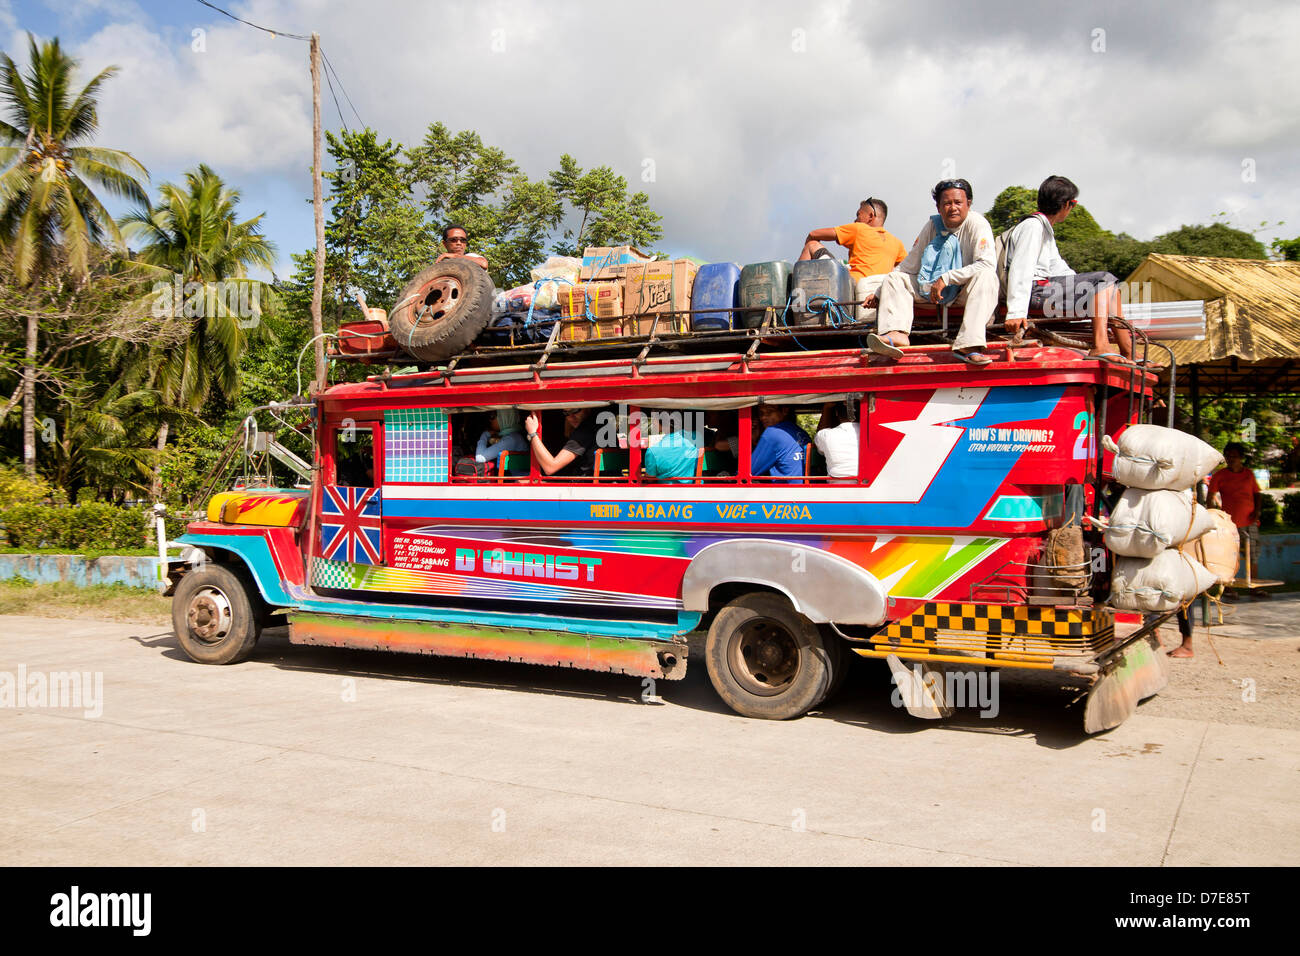 ully loaded Jeepney, responsible for public transportation in the Philippines, Sabang, Palawan, Philippines, Asia Stock Photo